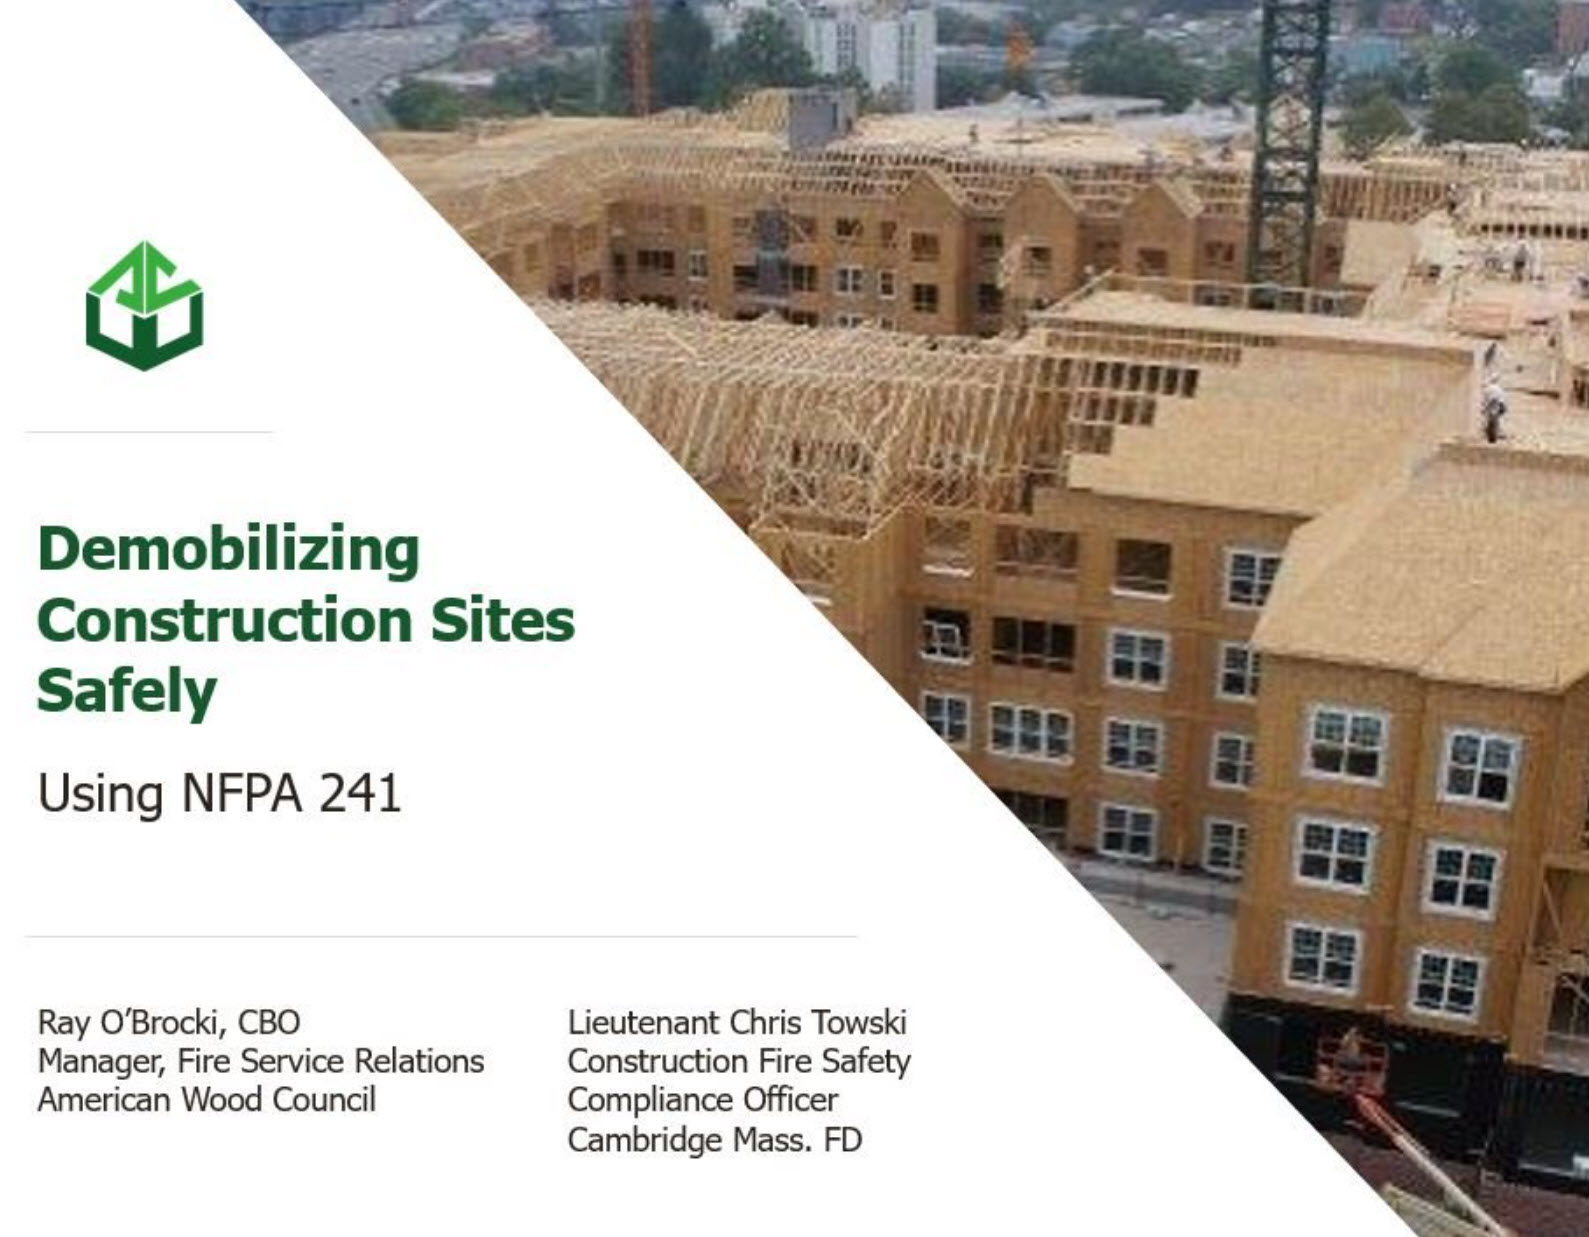 Demobilizing Construction Sites Safely Using NFPA 241